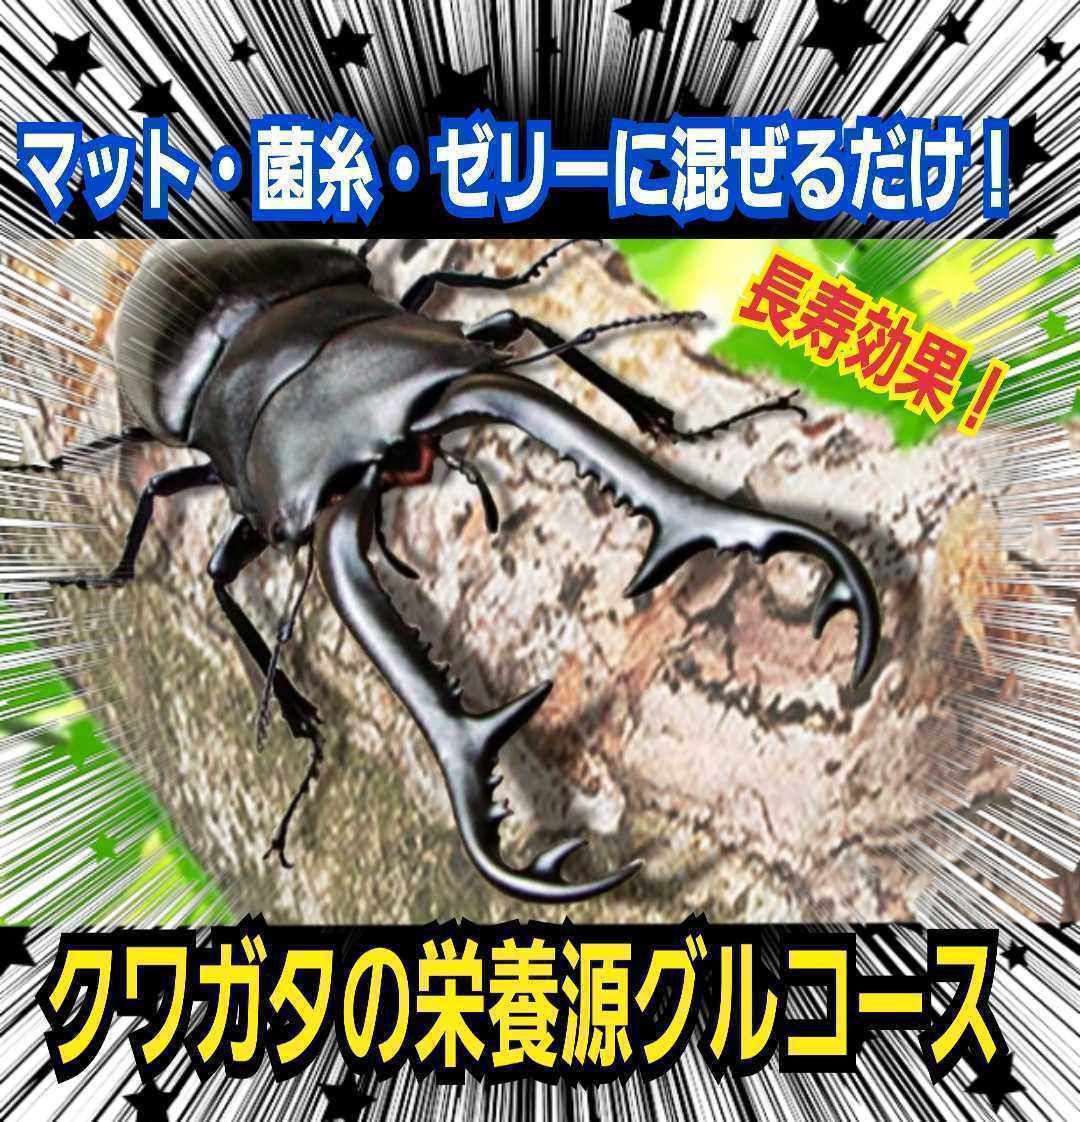  stag beetle * rhinoceros beetle exclusive use nutrition source gru course powder size up, production egg number up, length . exceptionally effective! mat .. thread * jelly .... only. 